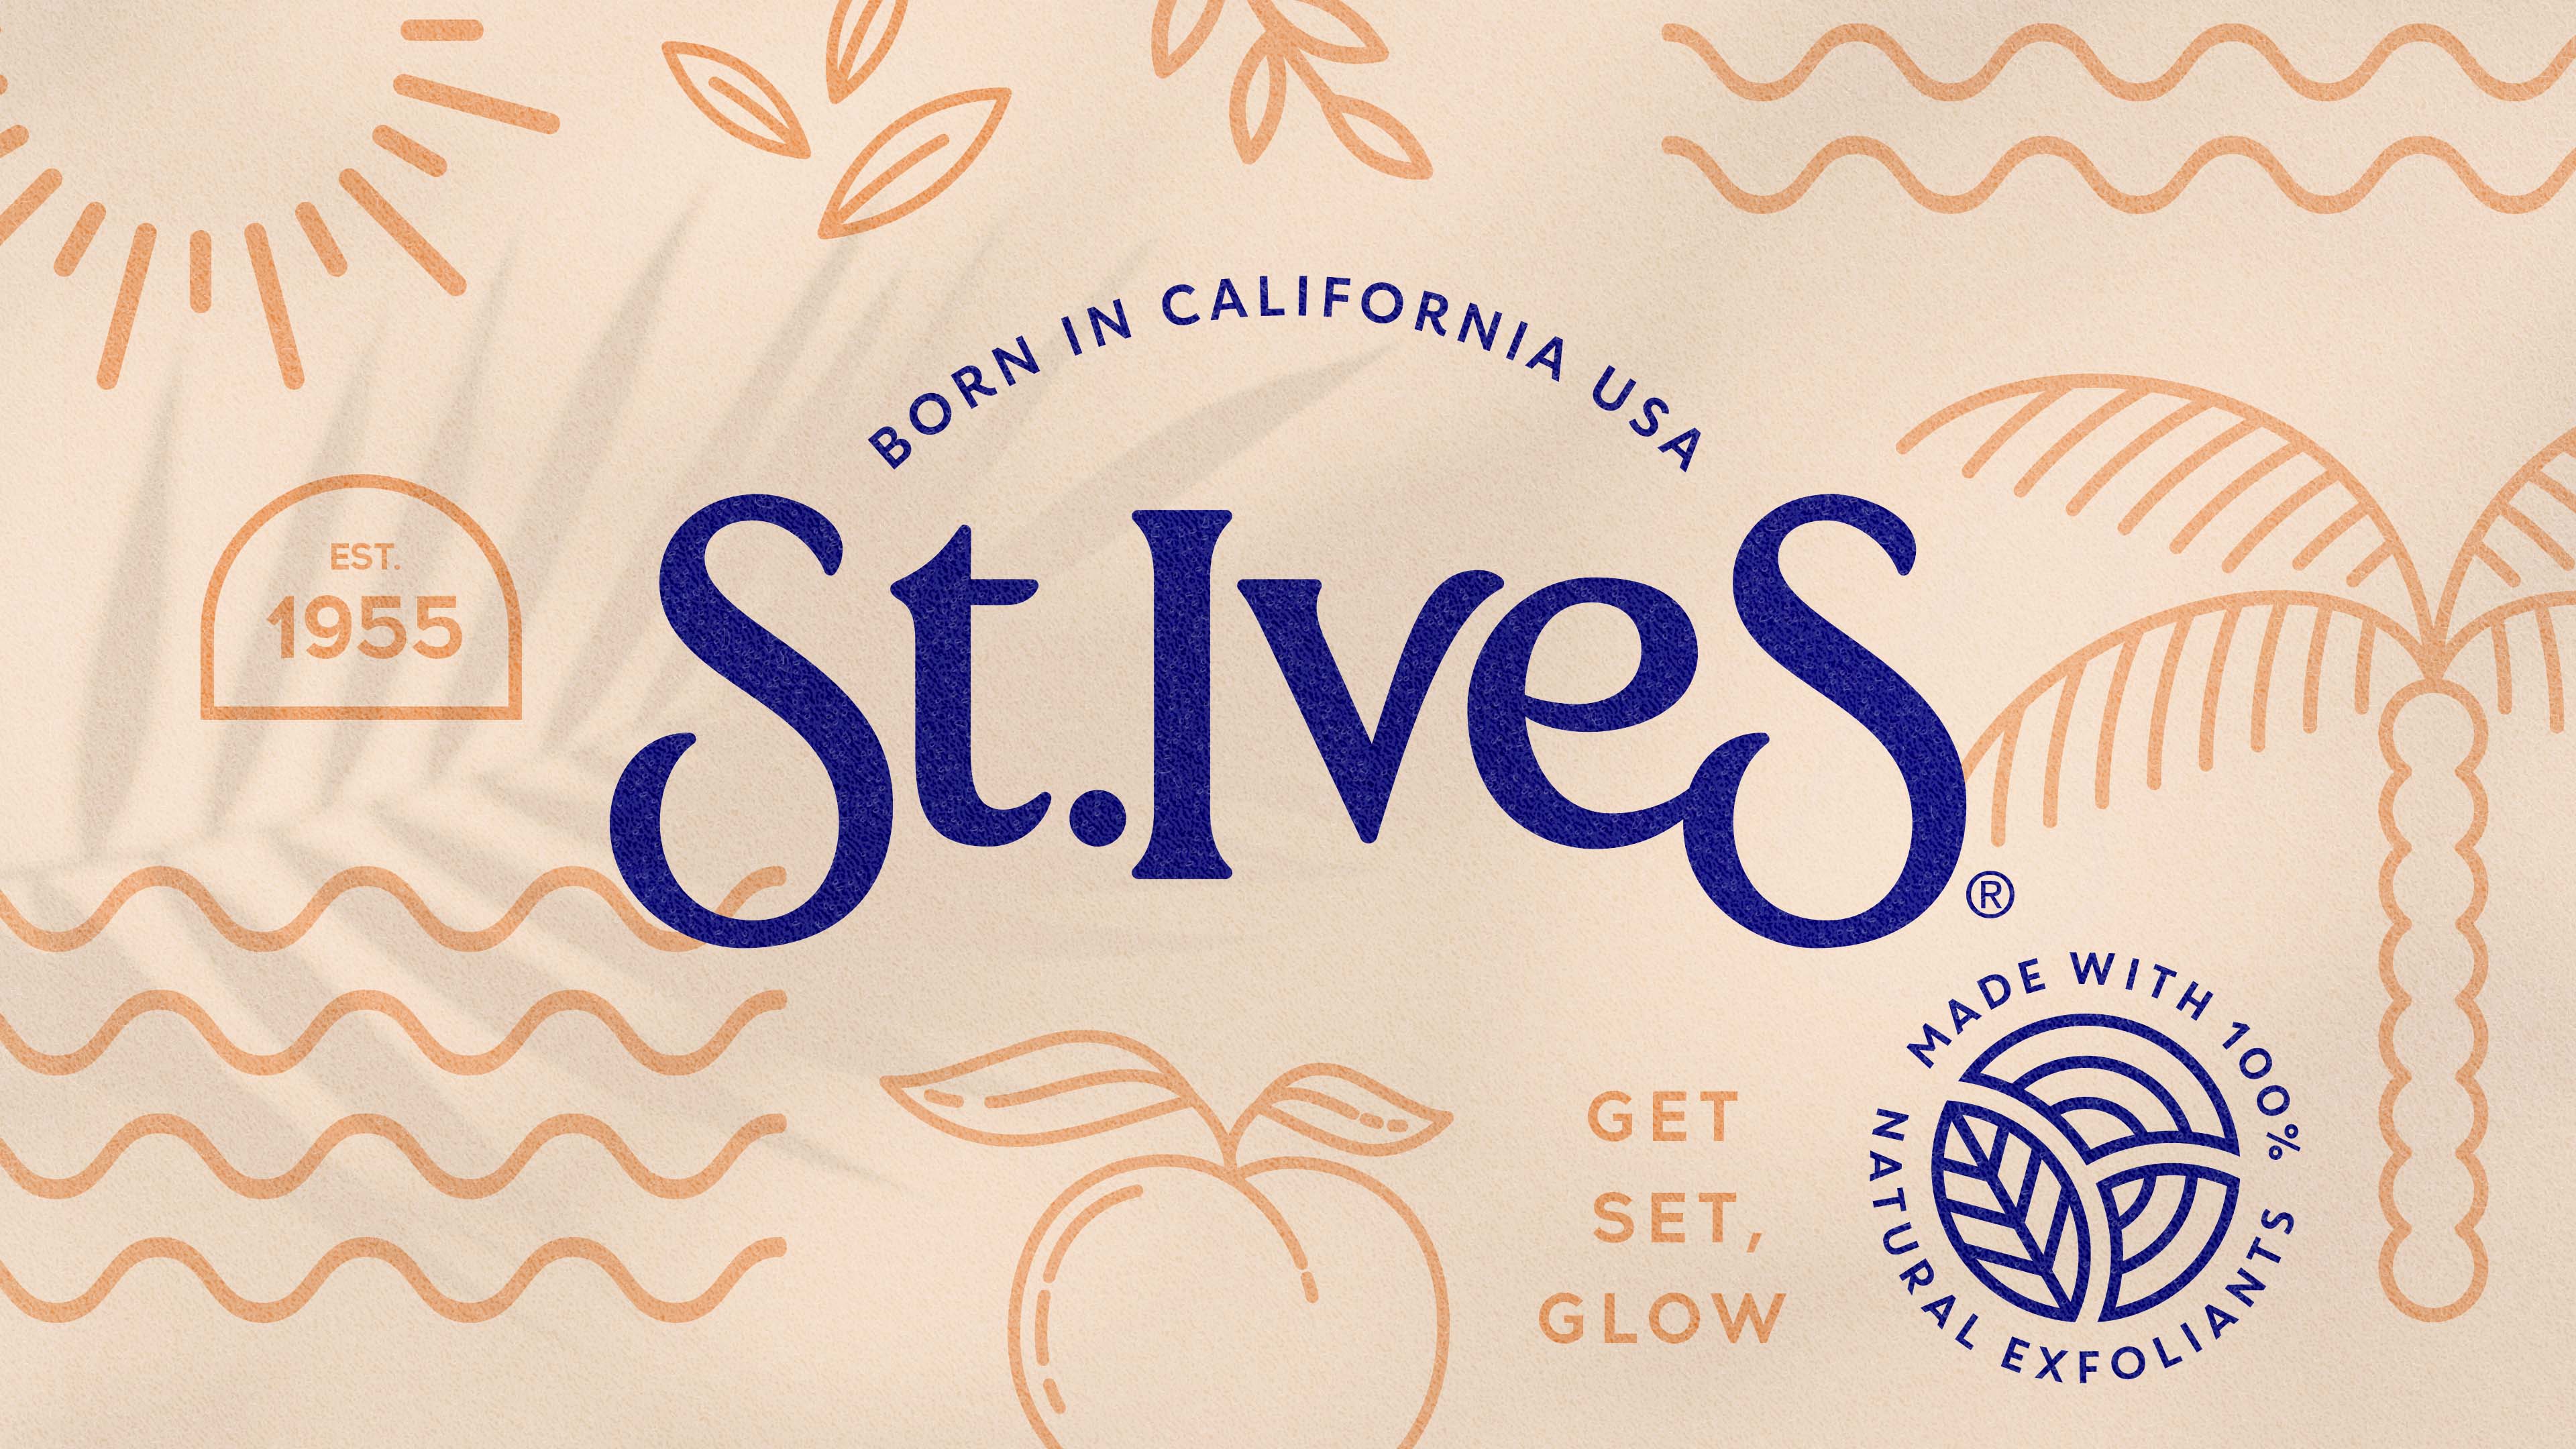 Sunhouse Brings St. Ives Back to Its Californian Roots